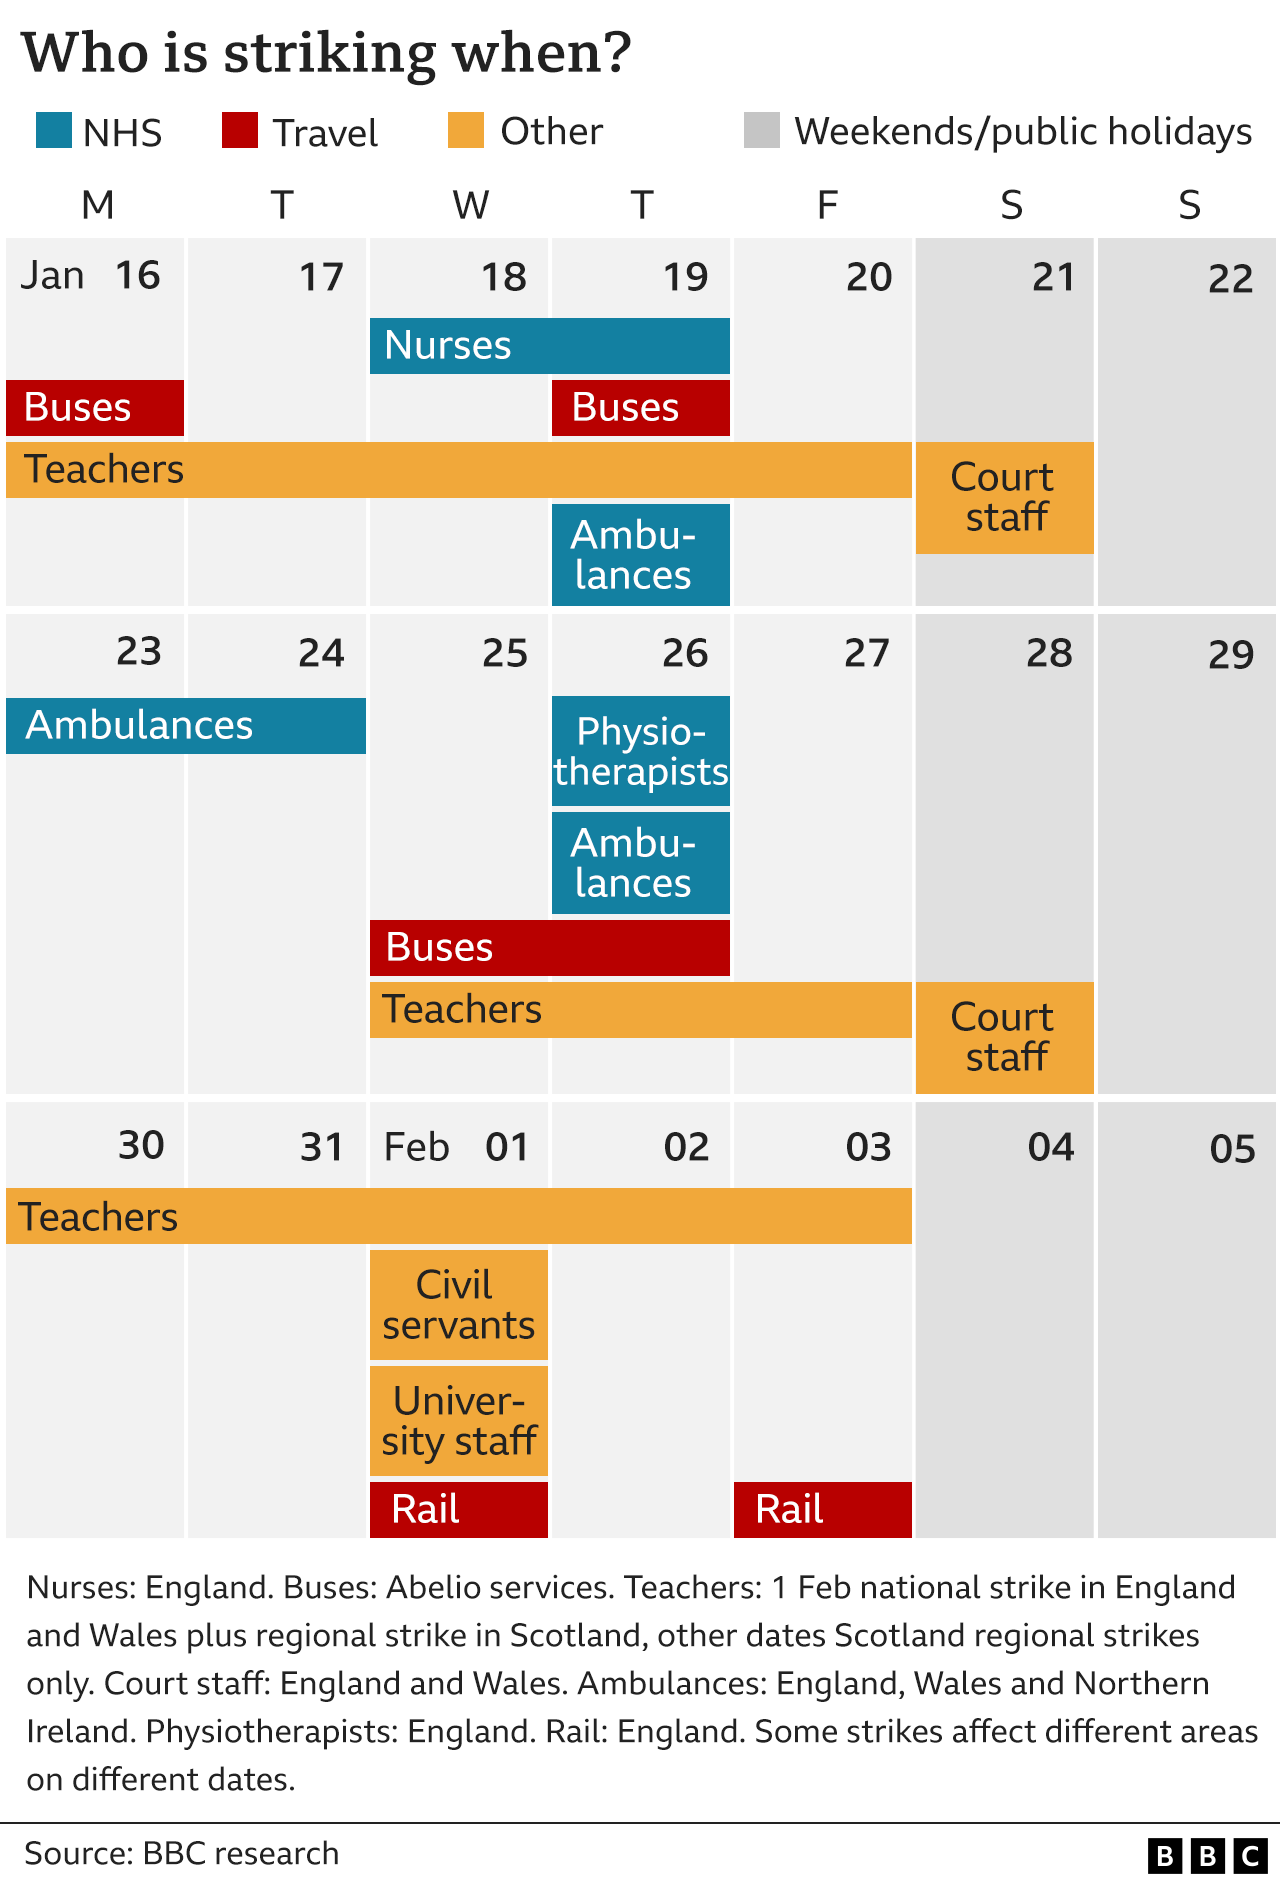 Graphic shows ambulance workers, nurses, teachers and railway staff who are going on strike over the coming week